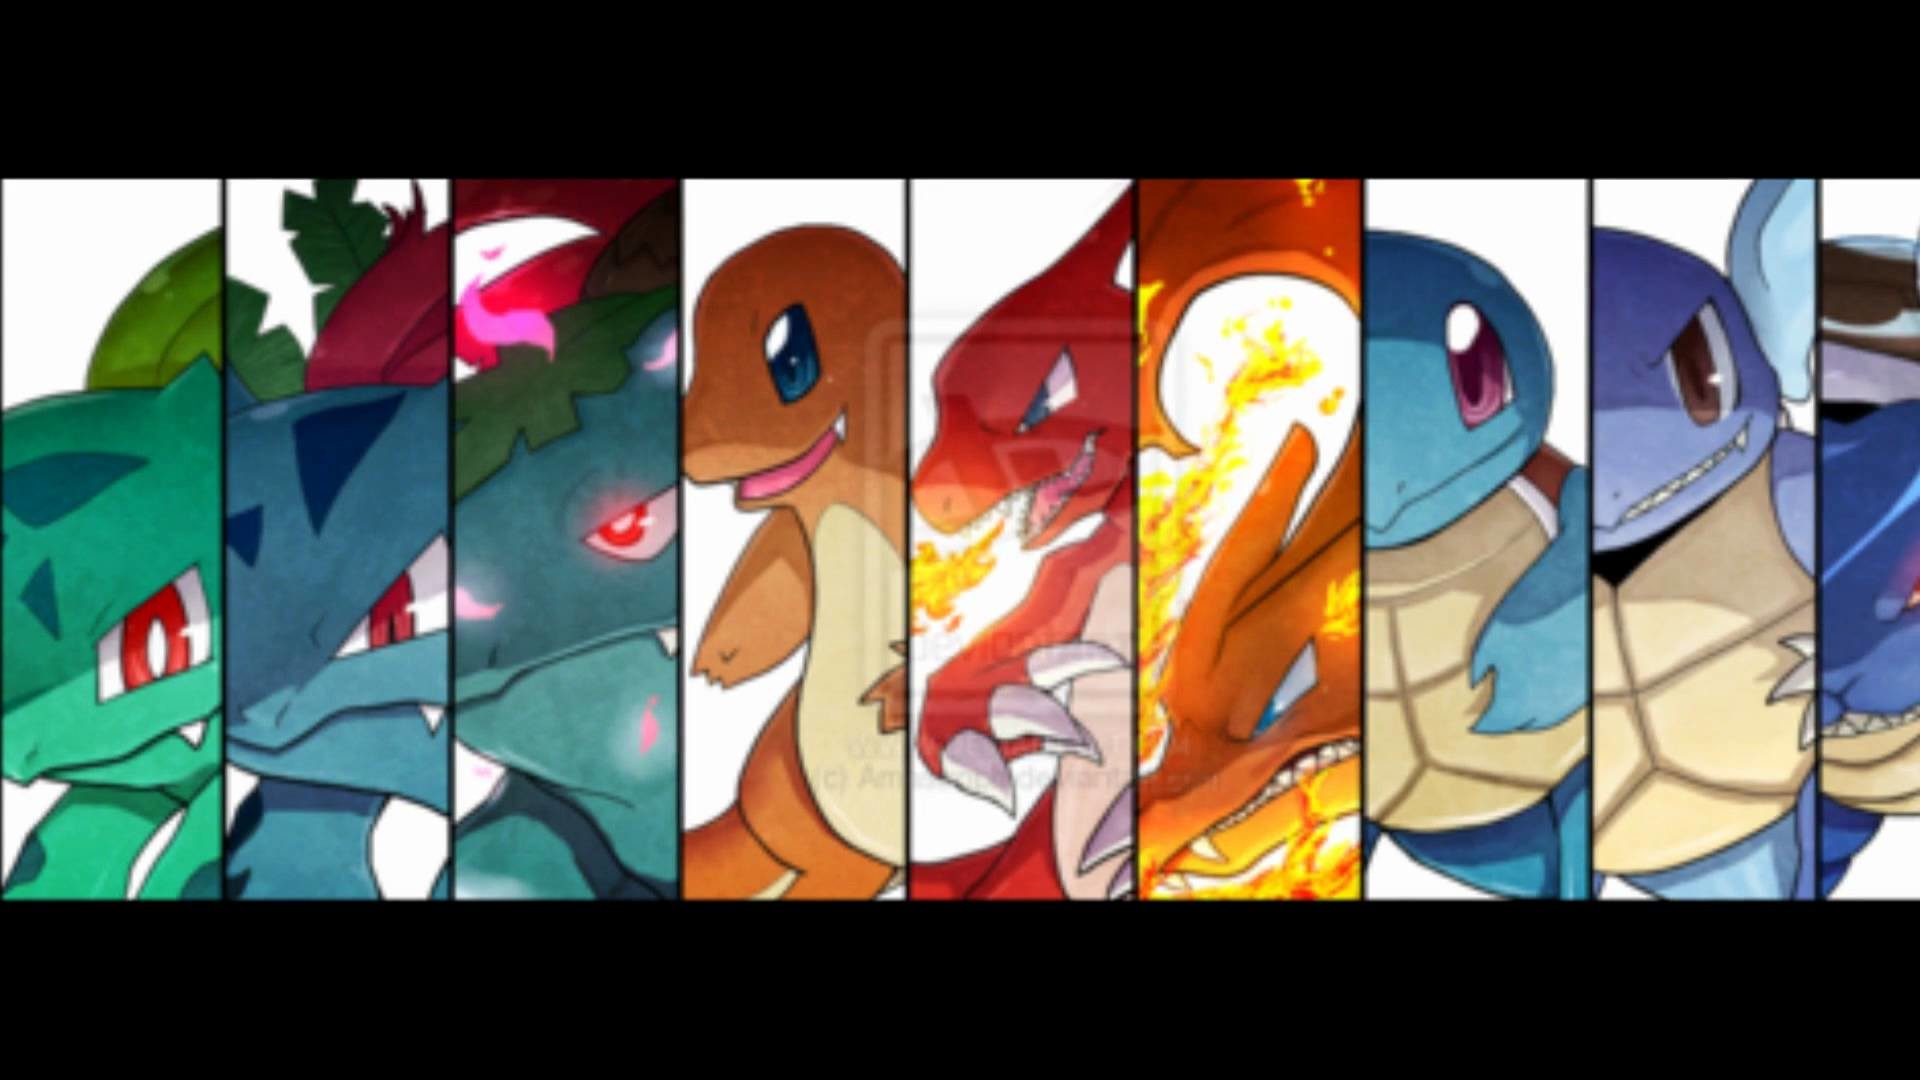 1920x1080 badass pokemon red wallpaper iphone with high resolution wallpaper on anime  category similar with character gold